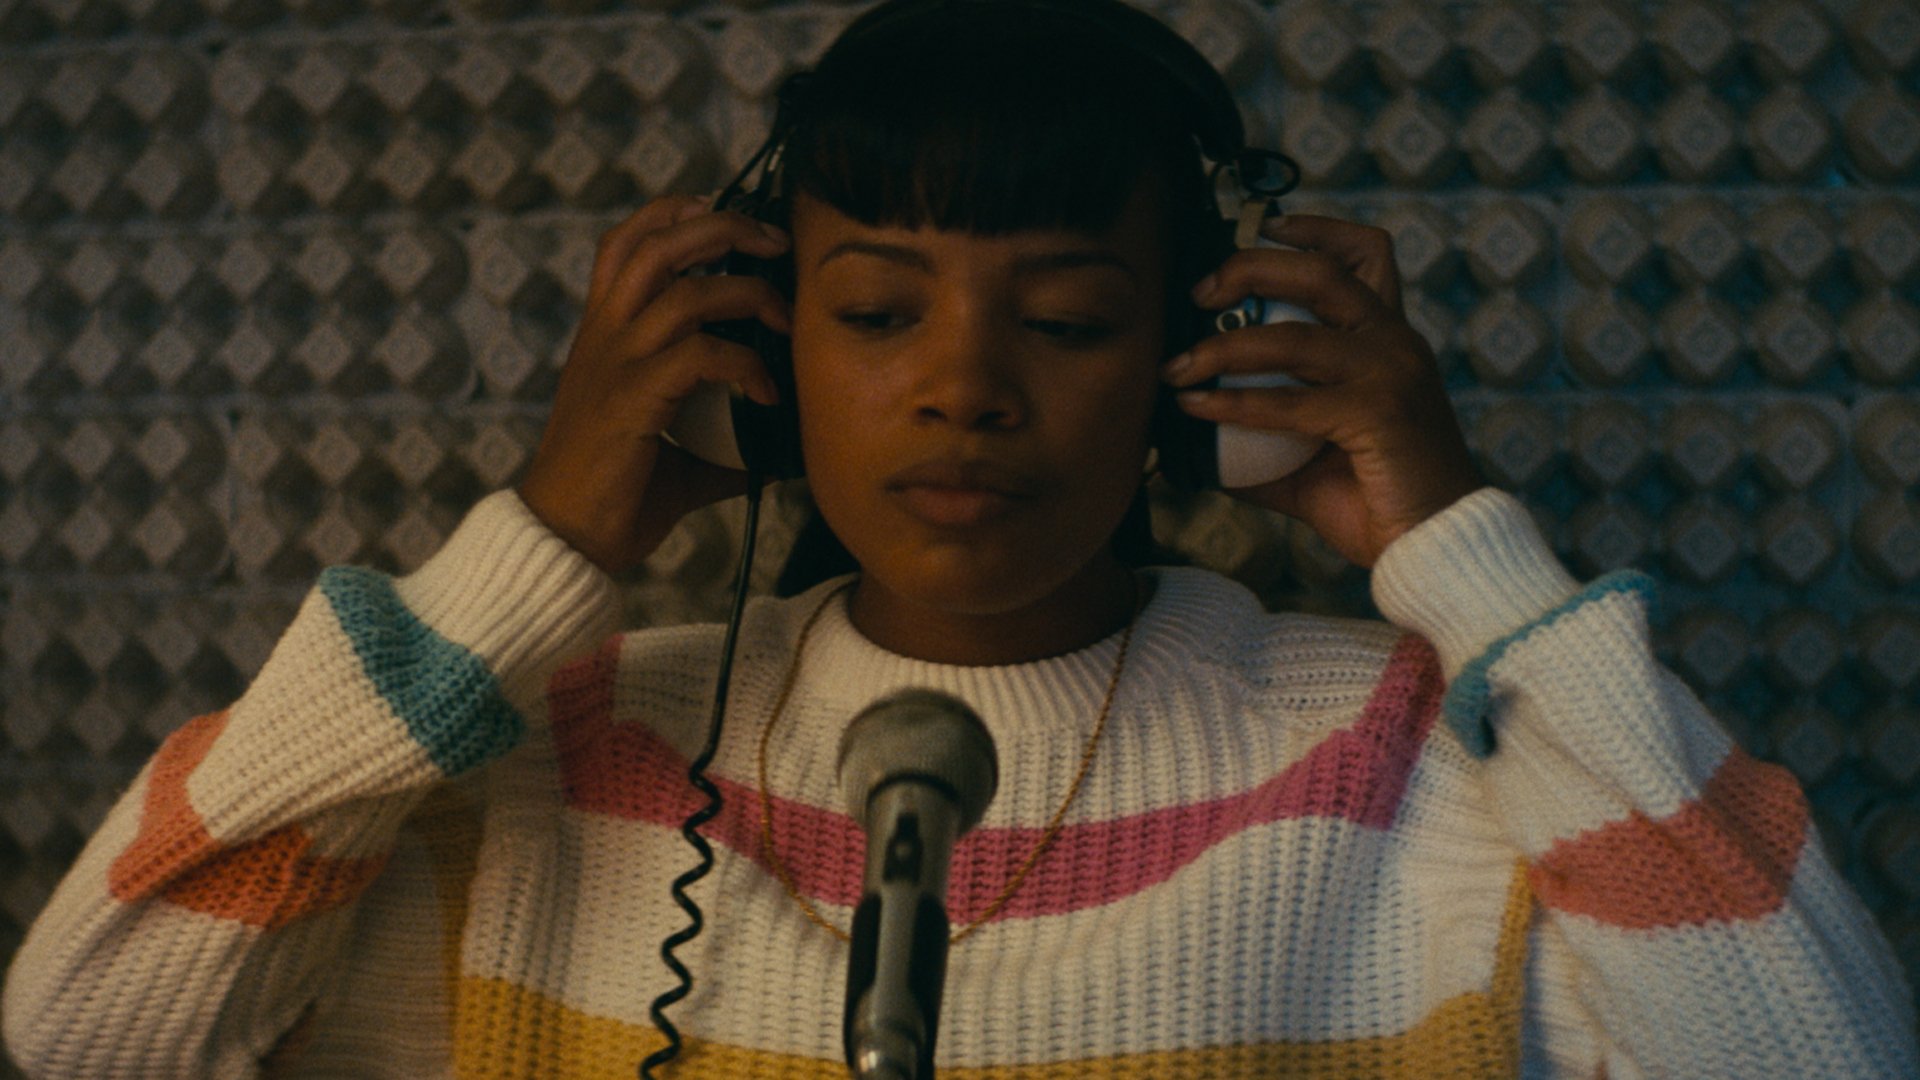 A woman in a striped sweater in front of a microphone puts headphones on and closes her eyes.